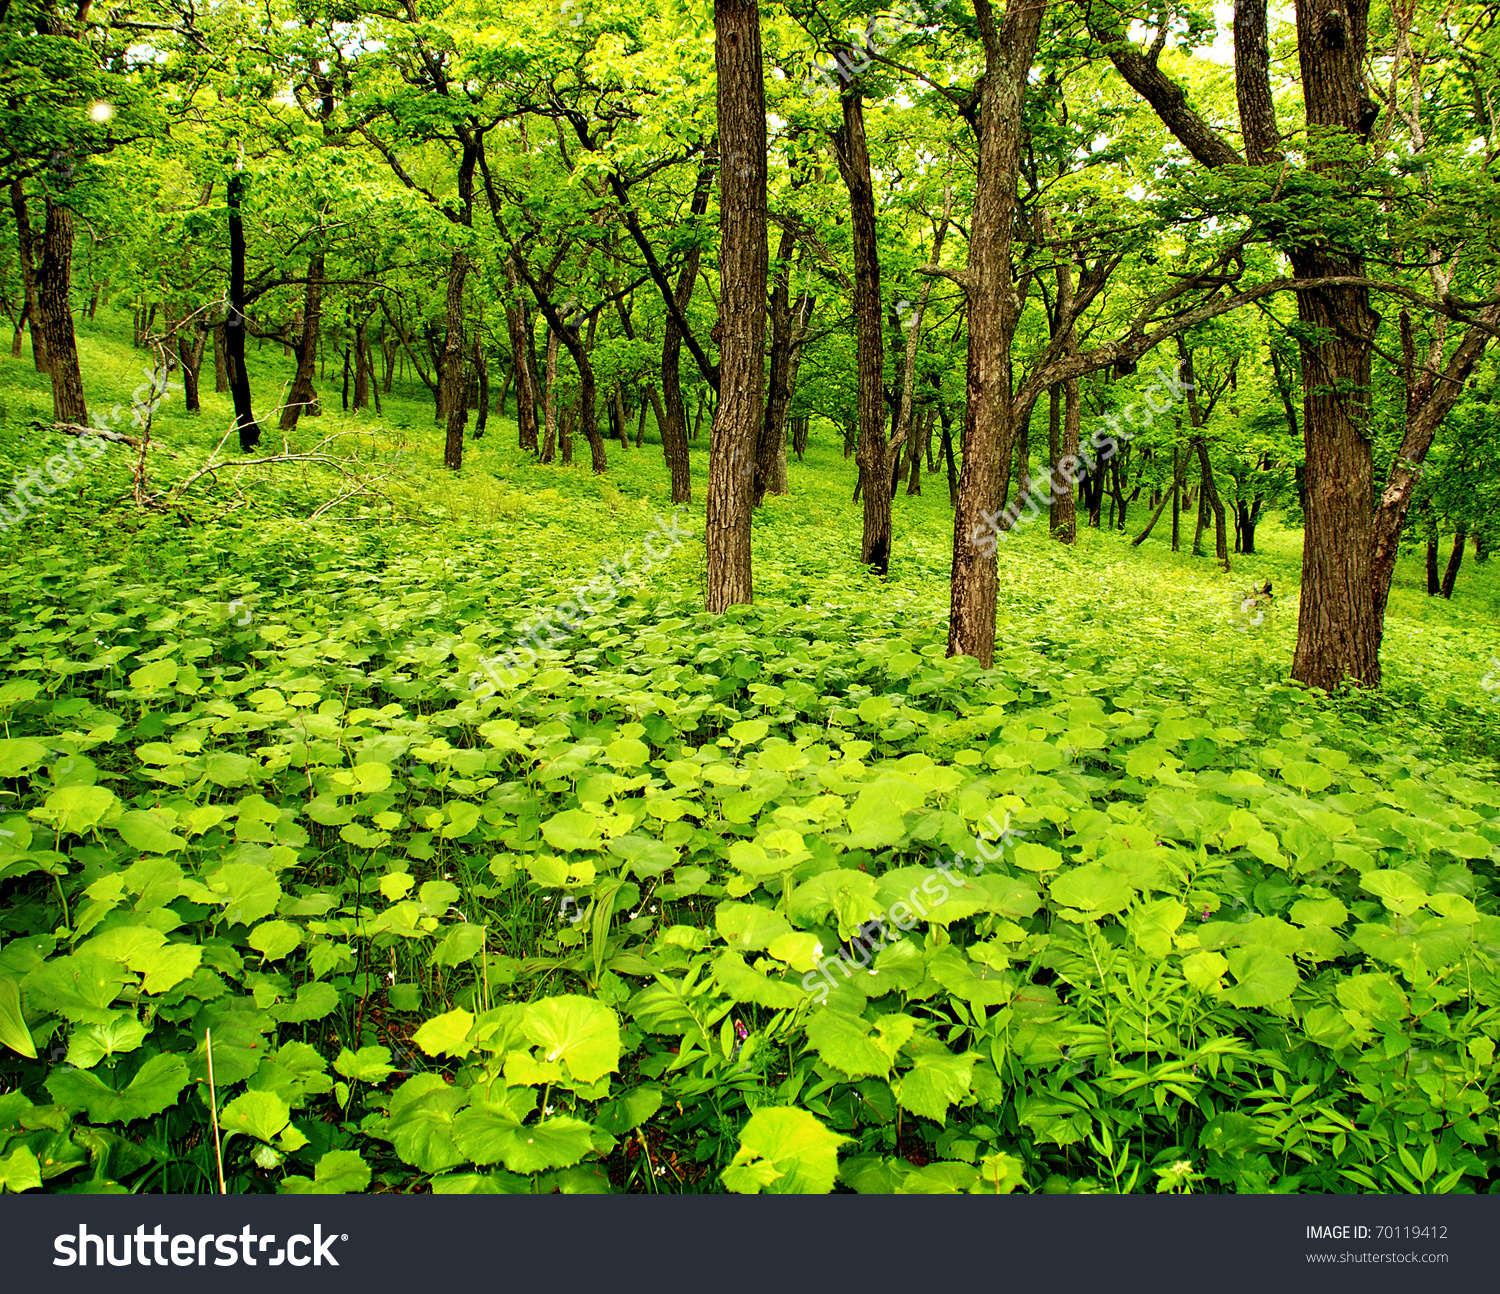 Young Spring Forest Green Leaves Stock Photo 70119412.